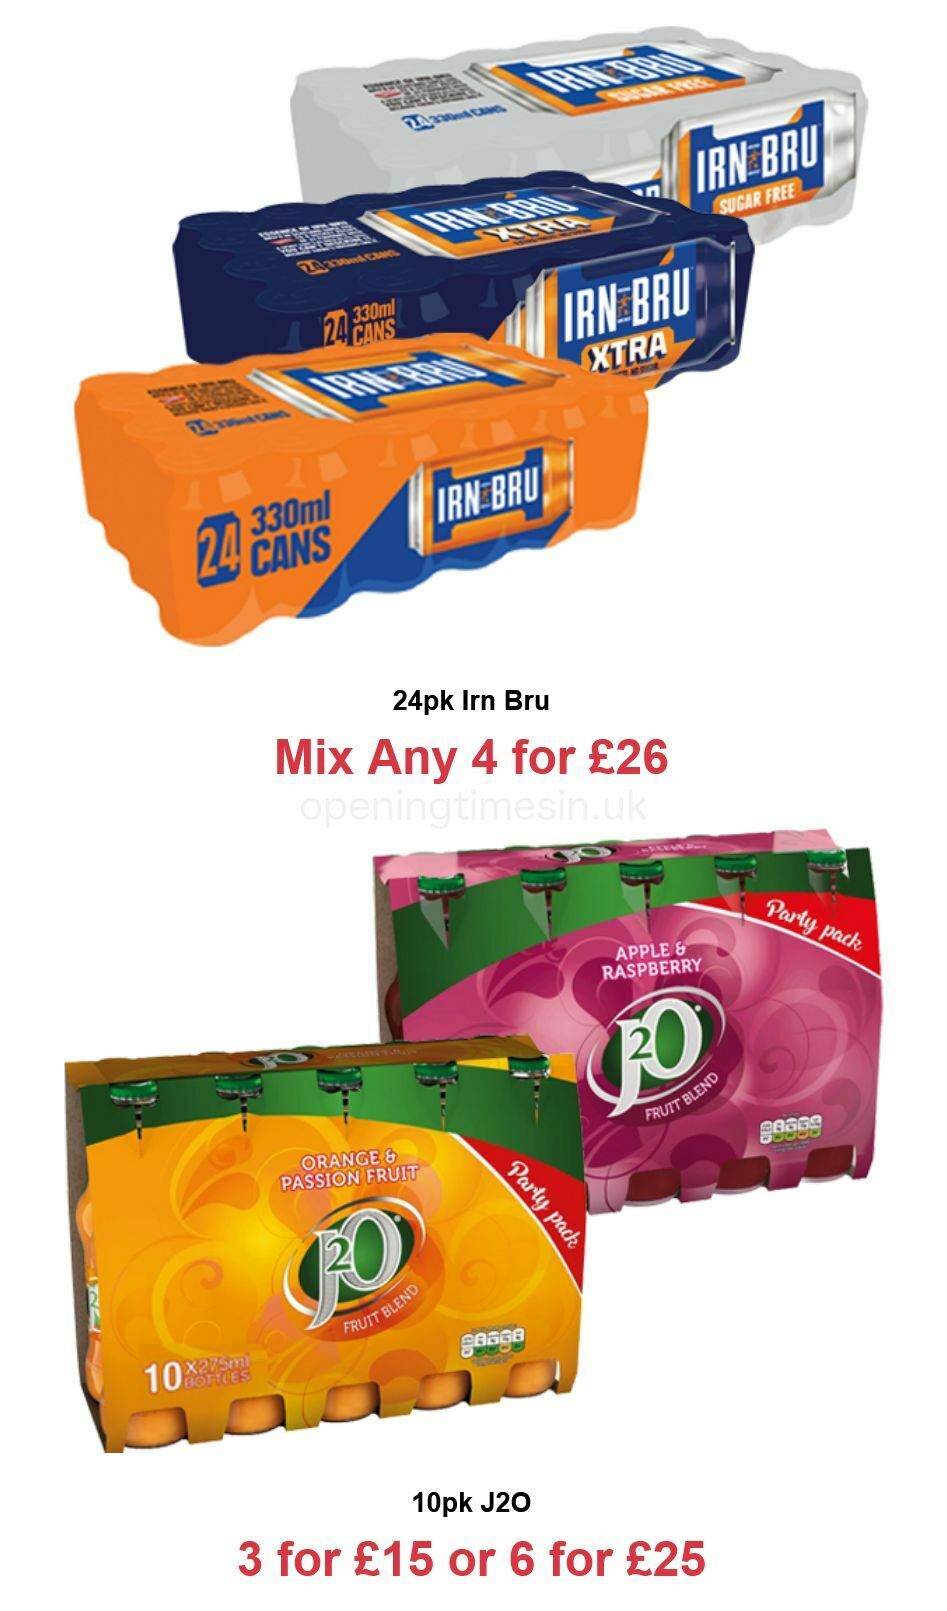 Farmfoods Offers from 19 April